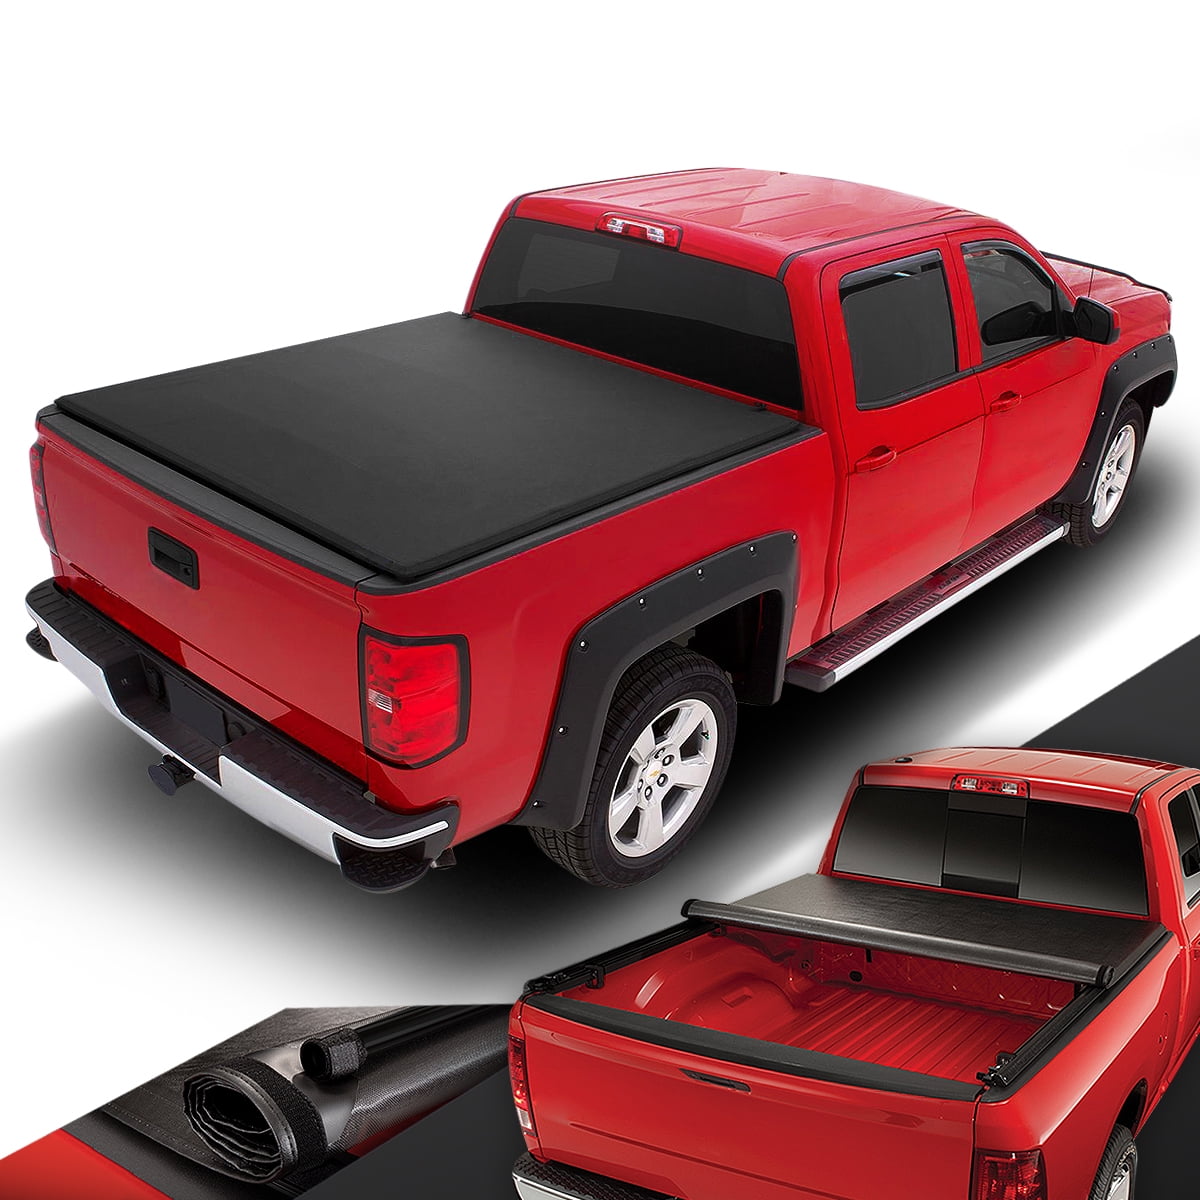 CSC 4 Layer Pickup Truck Cover for 1981 GMC C/K Series Standard Cab Long Bed